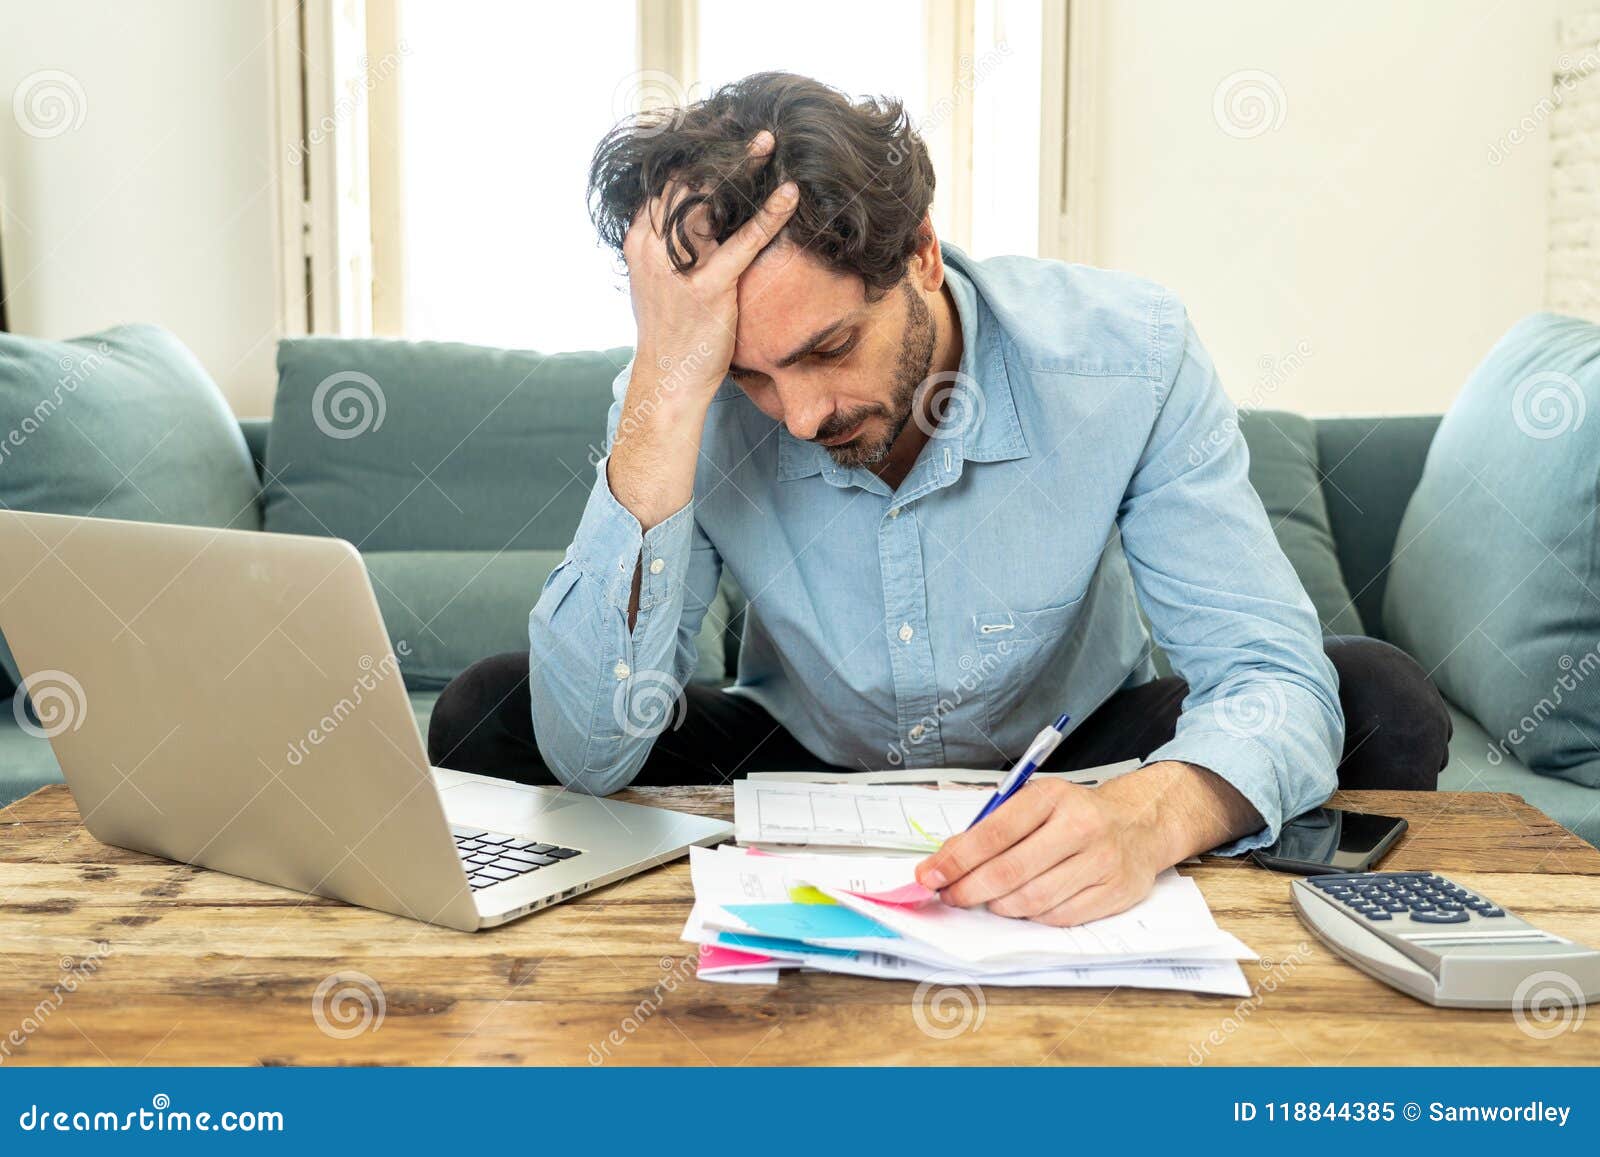 angry man paying bills as home with laptop and calculator